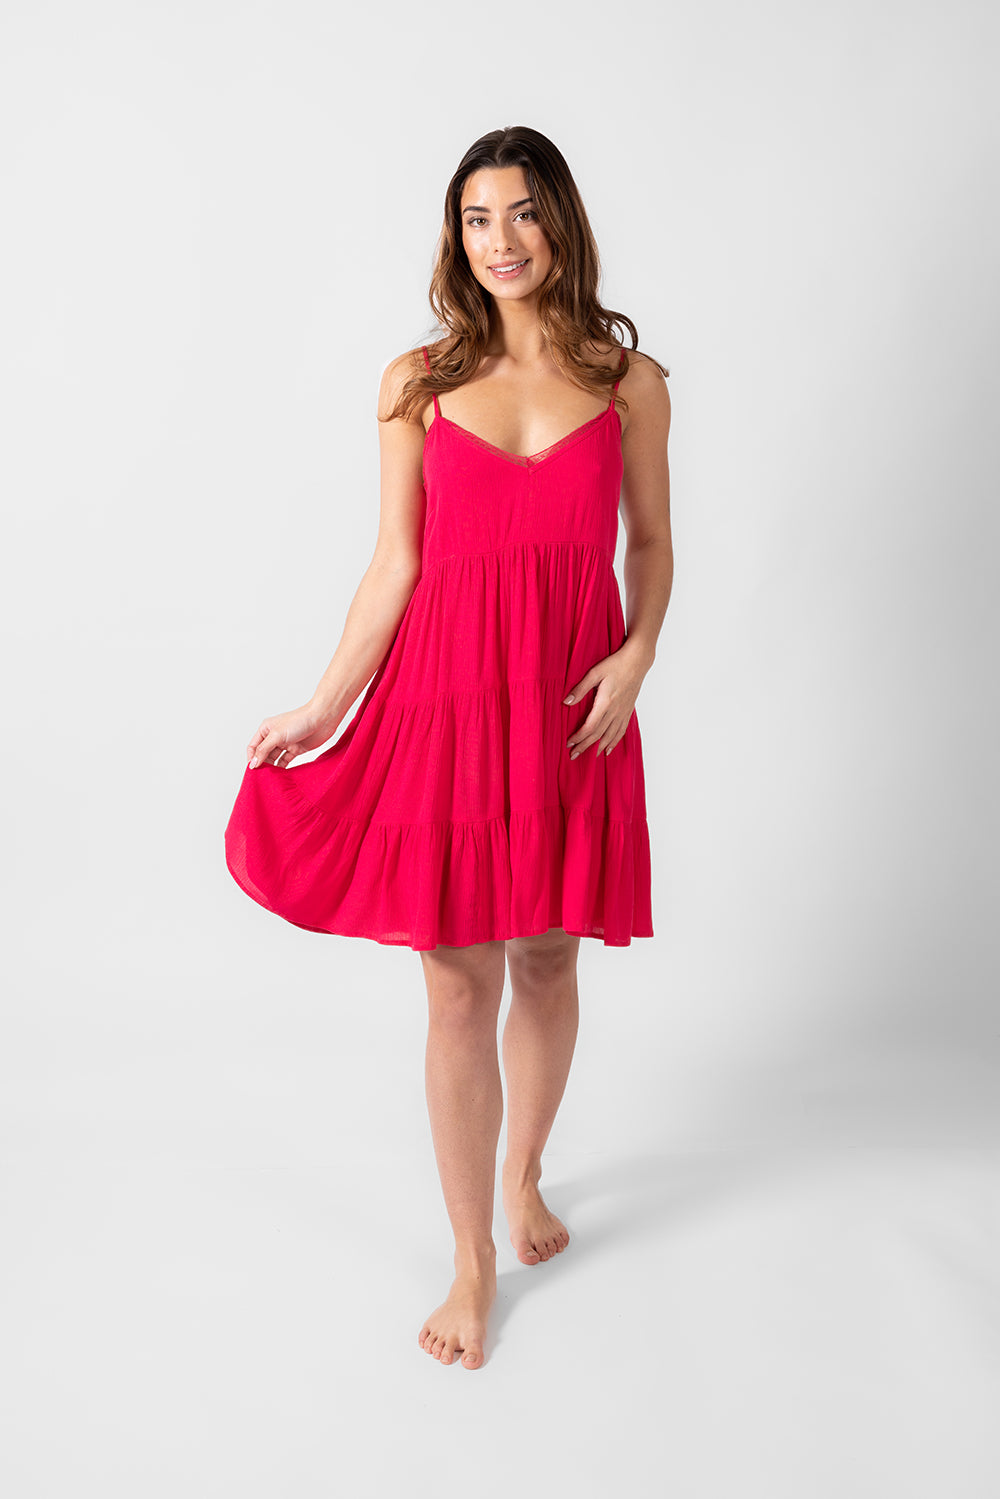 a front shot of a brunette hair woman holding the edge of her raspberry colored spaghetti strap summer beach dress